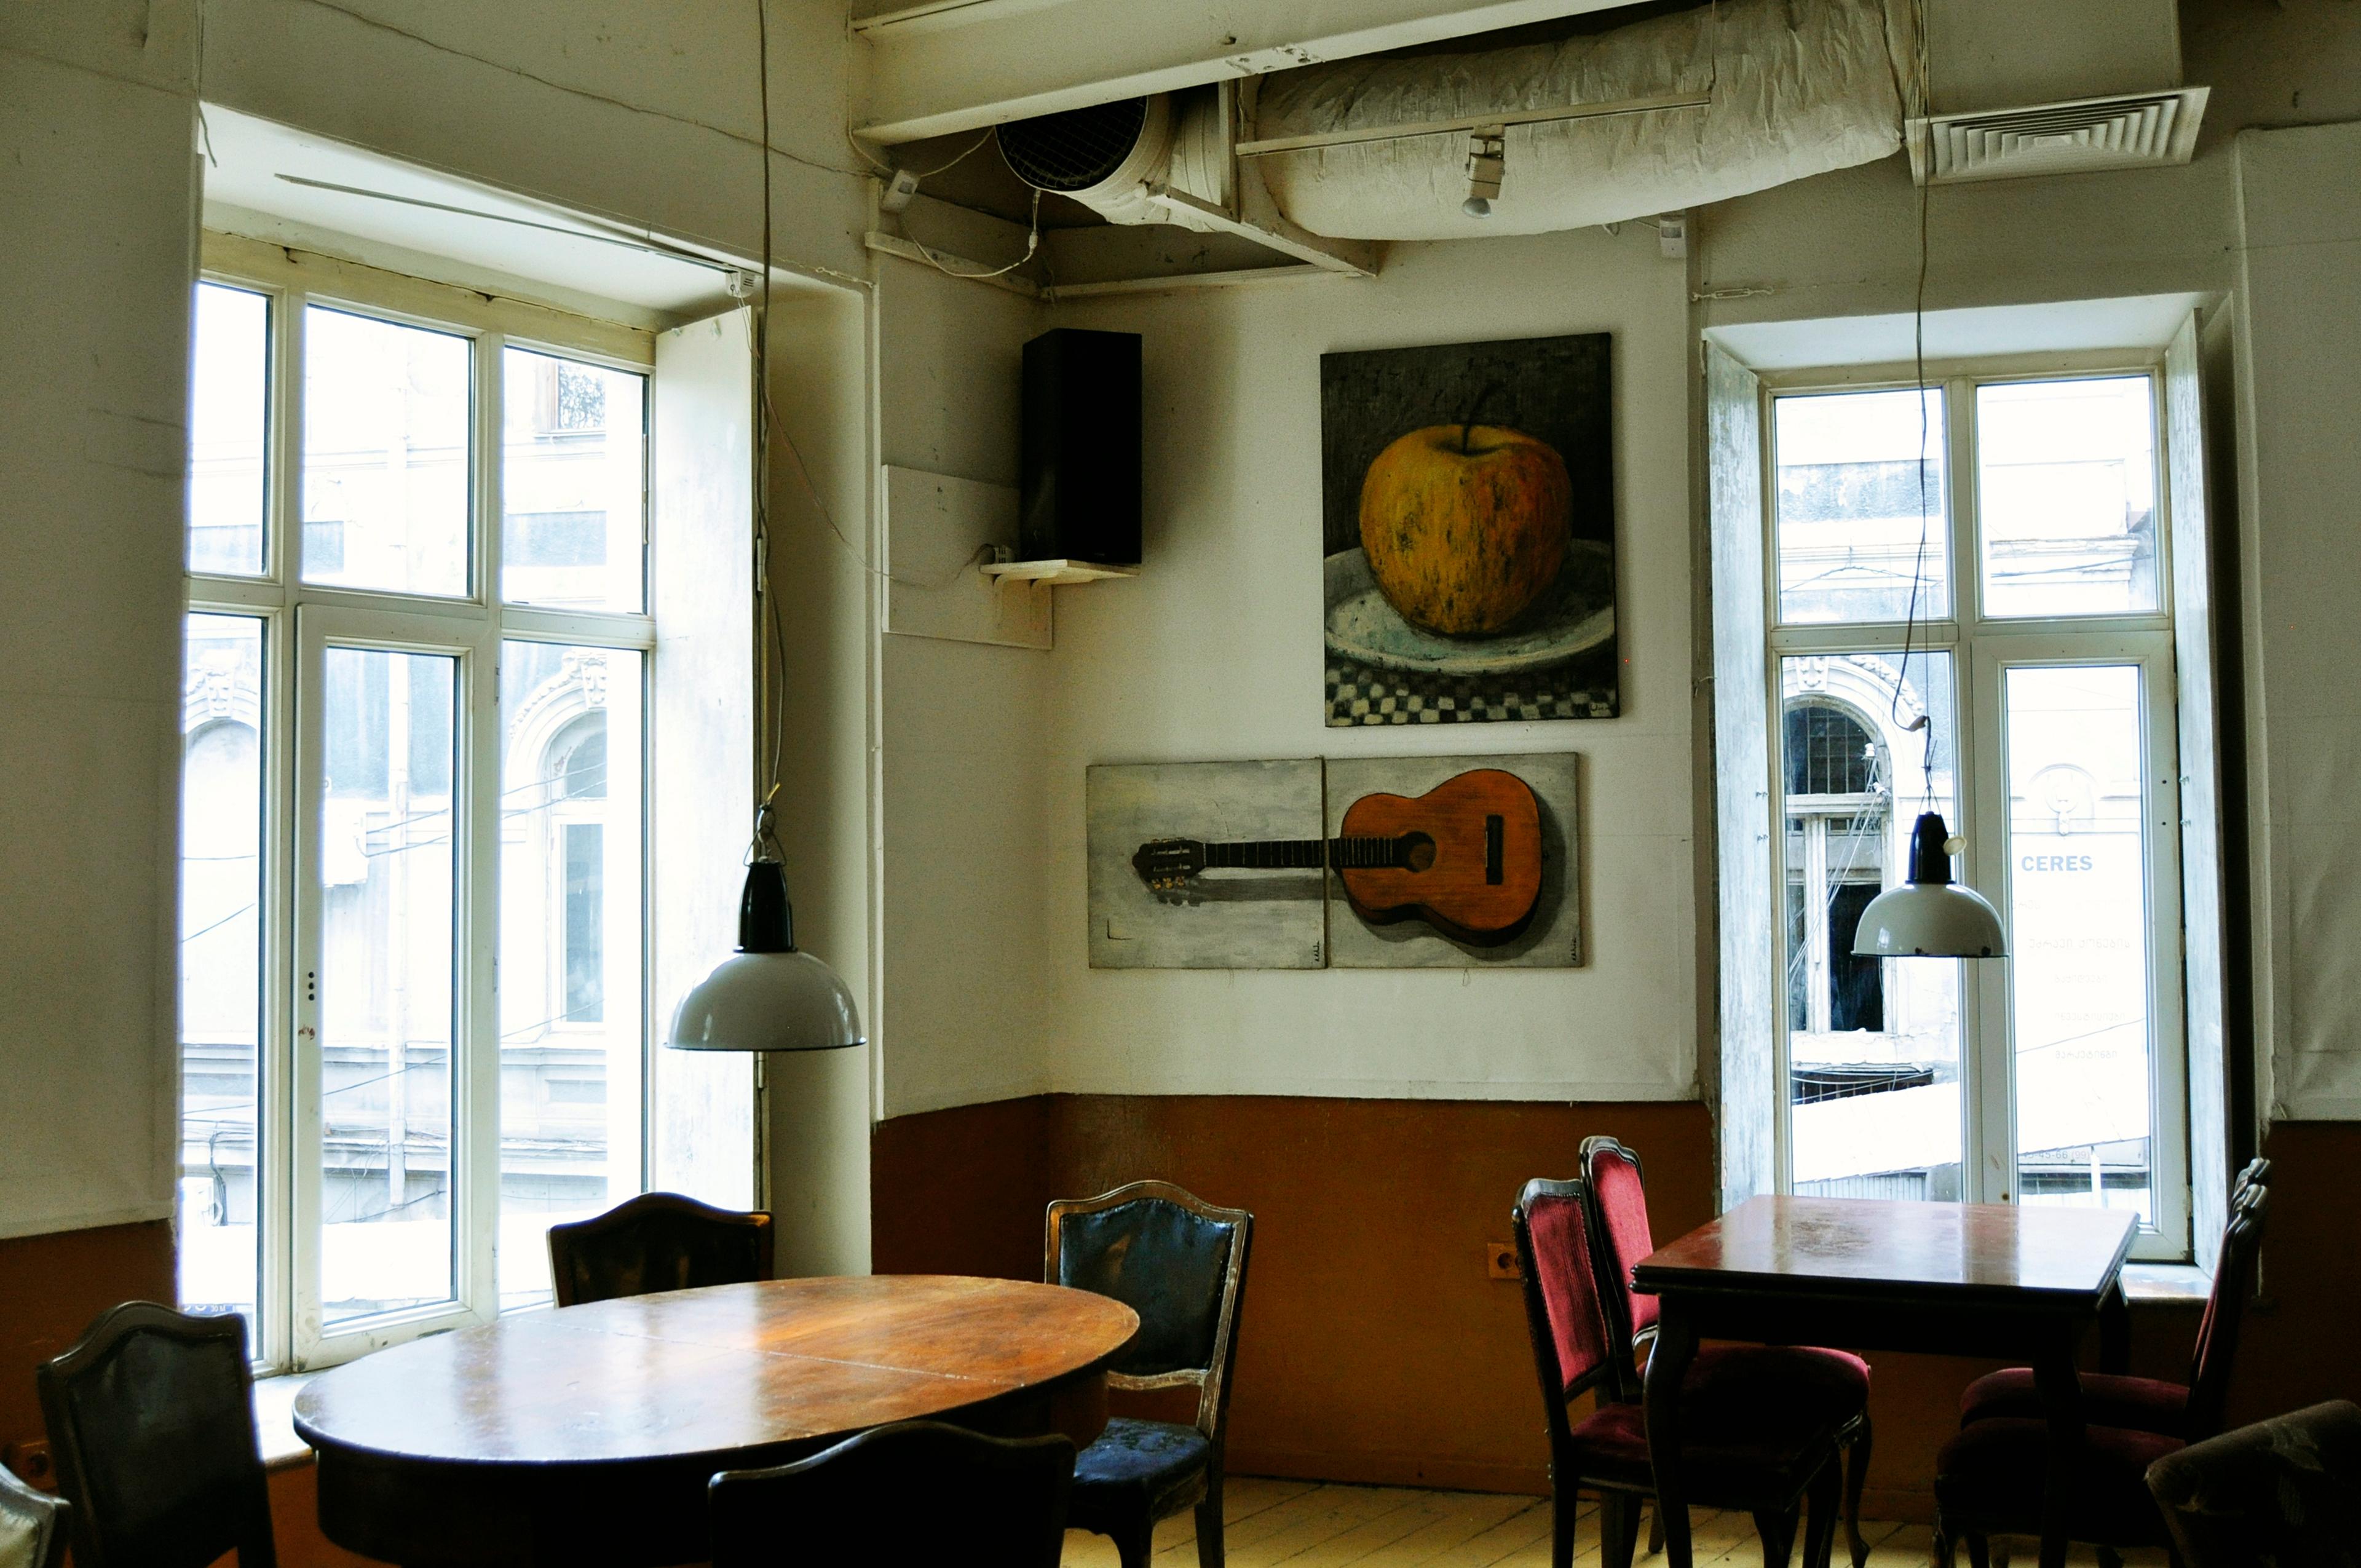 Cover image of this place Cafe Gallery